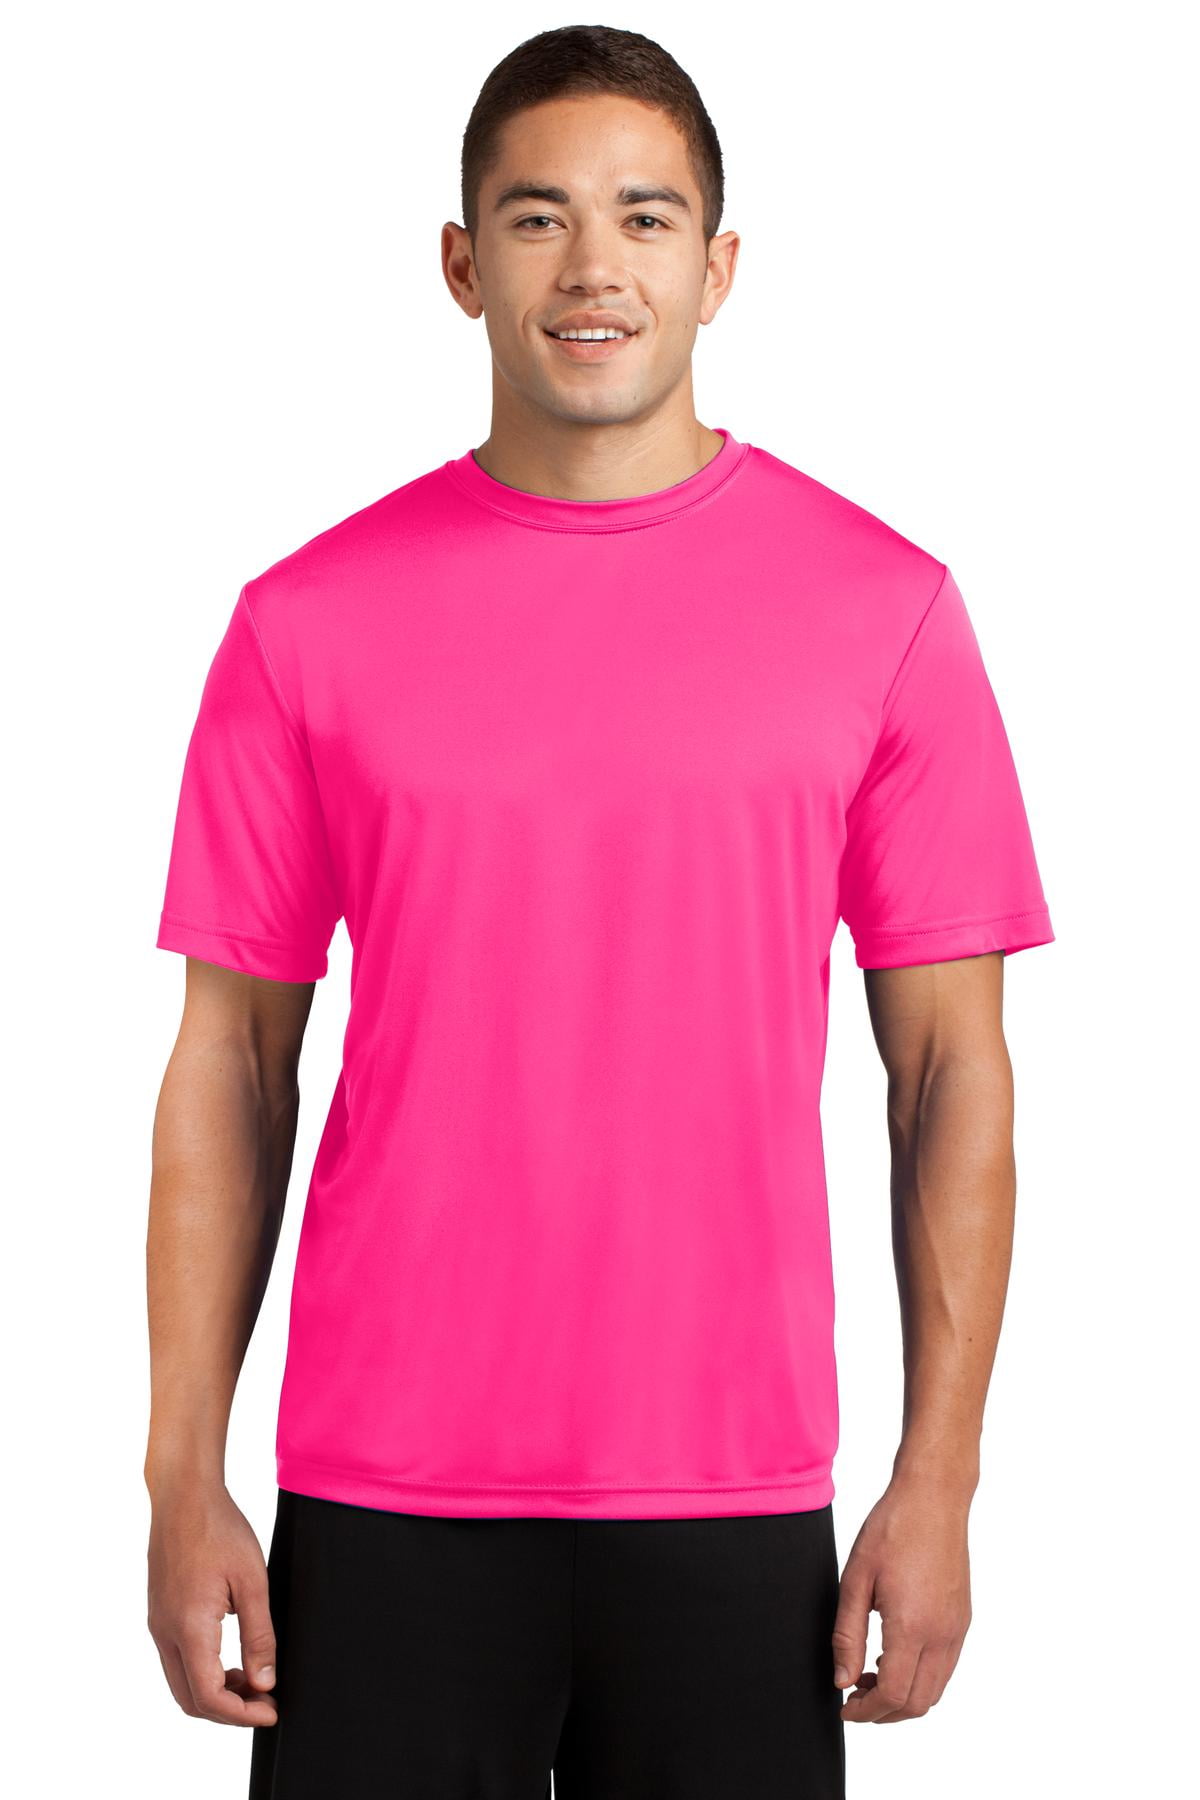 Tee St350 Sport-Tek Pink - Posicharge - L Neon Competitor